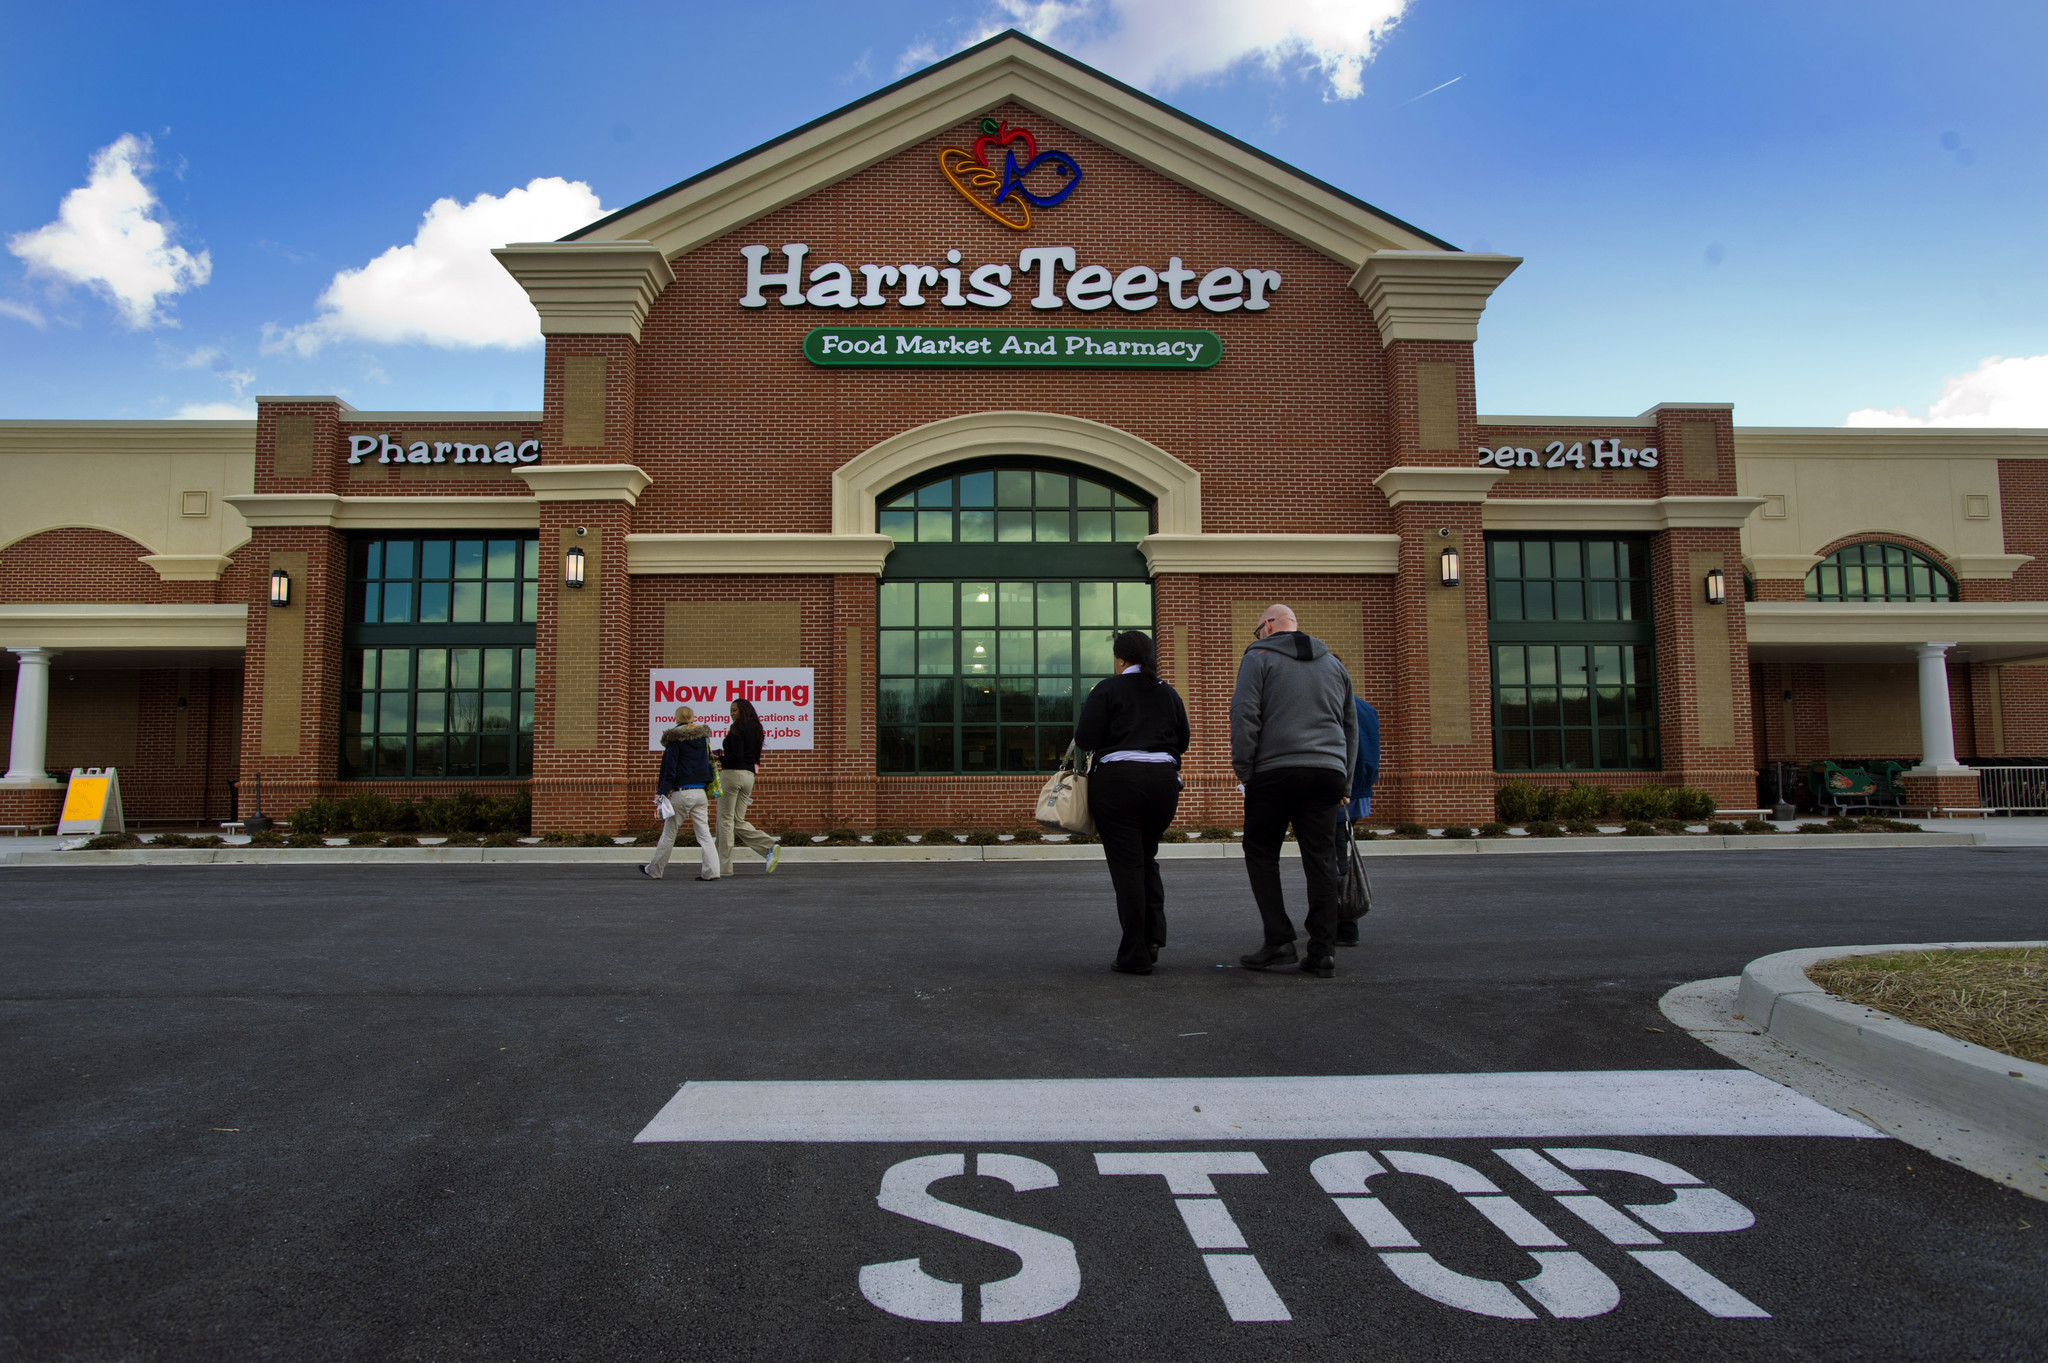 Harris Teeter to be acquired by Kroger in $2.5 billion deal - Baltimore Sun